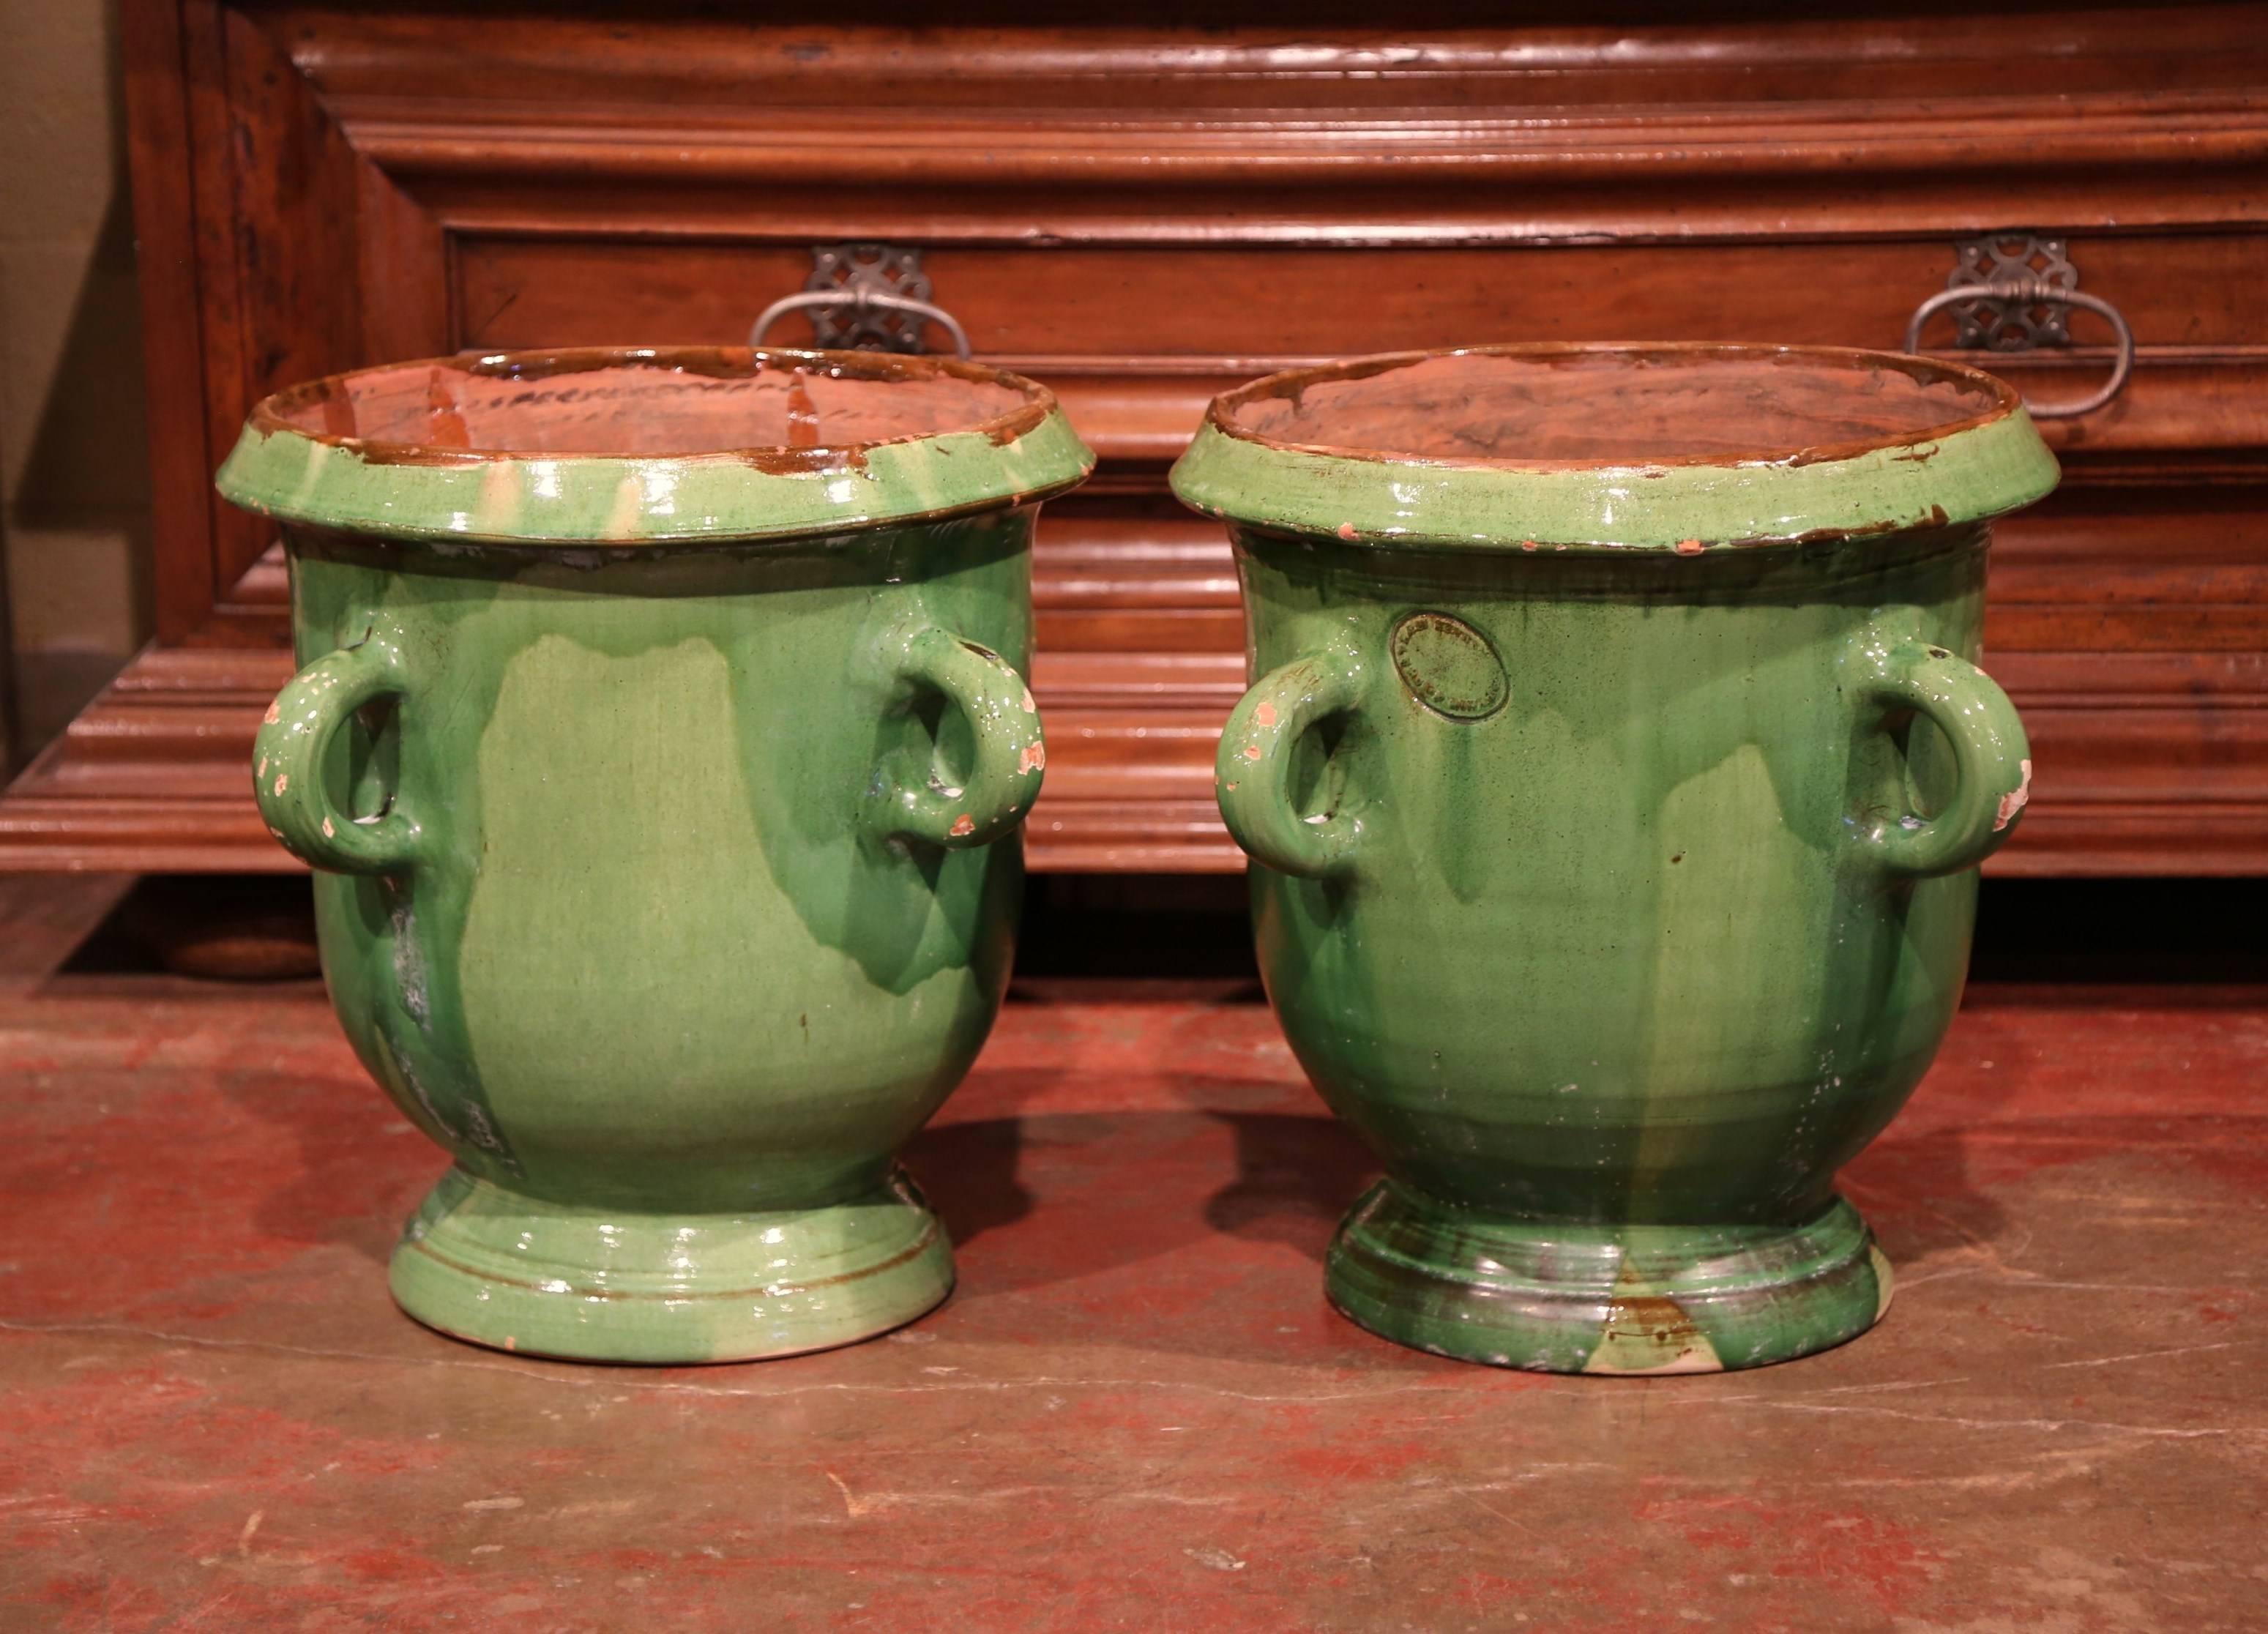 Earthenware Pair of Mid-20th Century French Glazed Green Planters with Handles from Provence